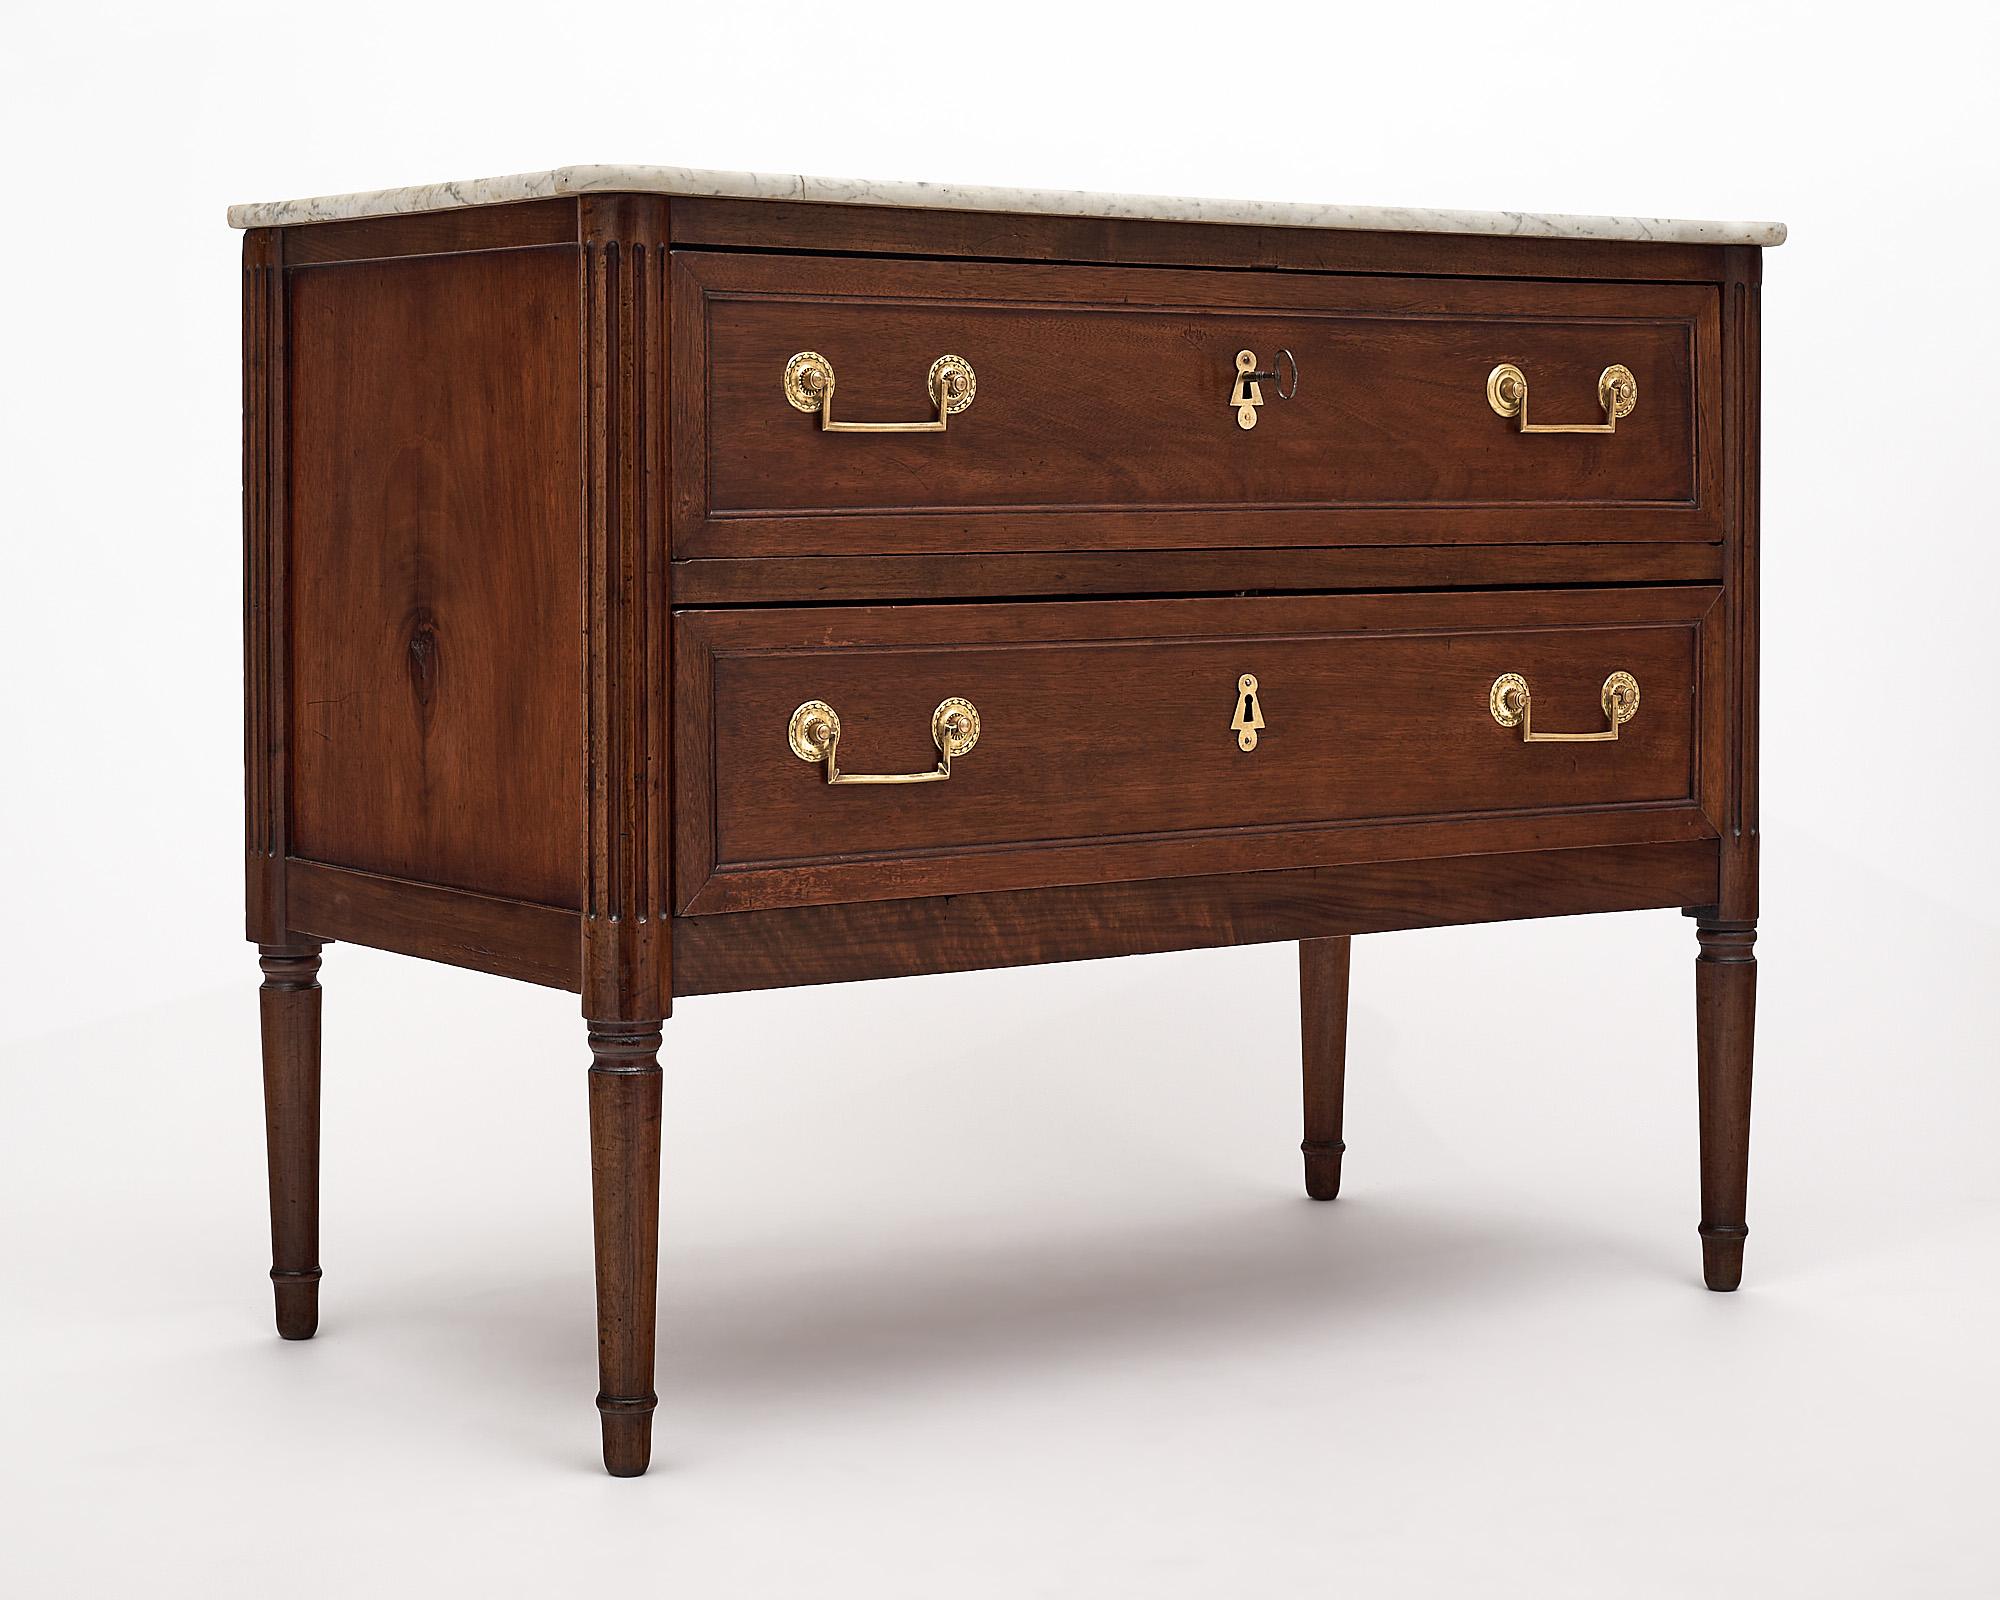 Chest of drawers, French, from the Louis XVI period. This chest is from the Rhone valley and made of solid walnut with a hand rubbed bees wax finish. Two dovetailed drawers each have brass hardware. The “commode” is topped with its original Carrara